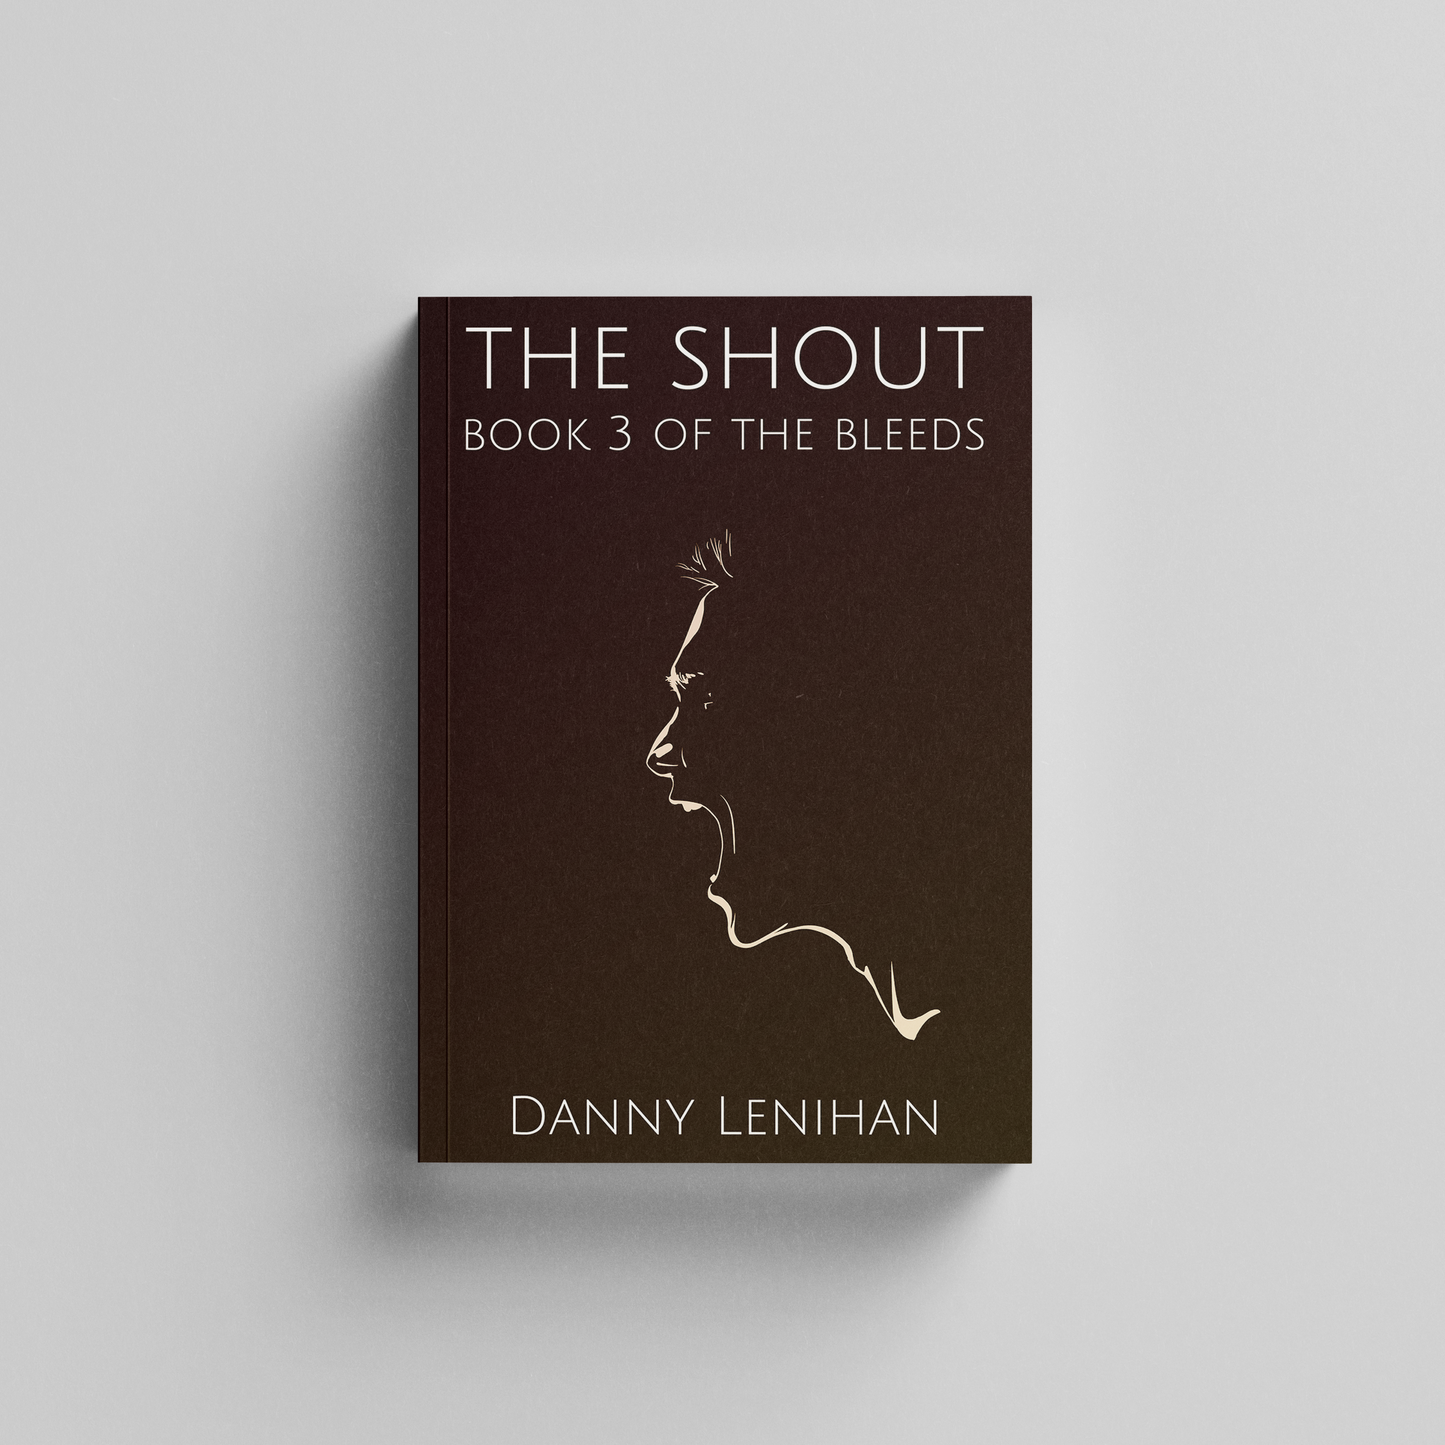 The Shout: Book 3 of The Bleeds - eBook Edition